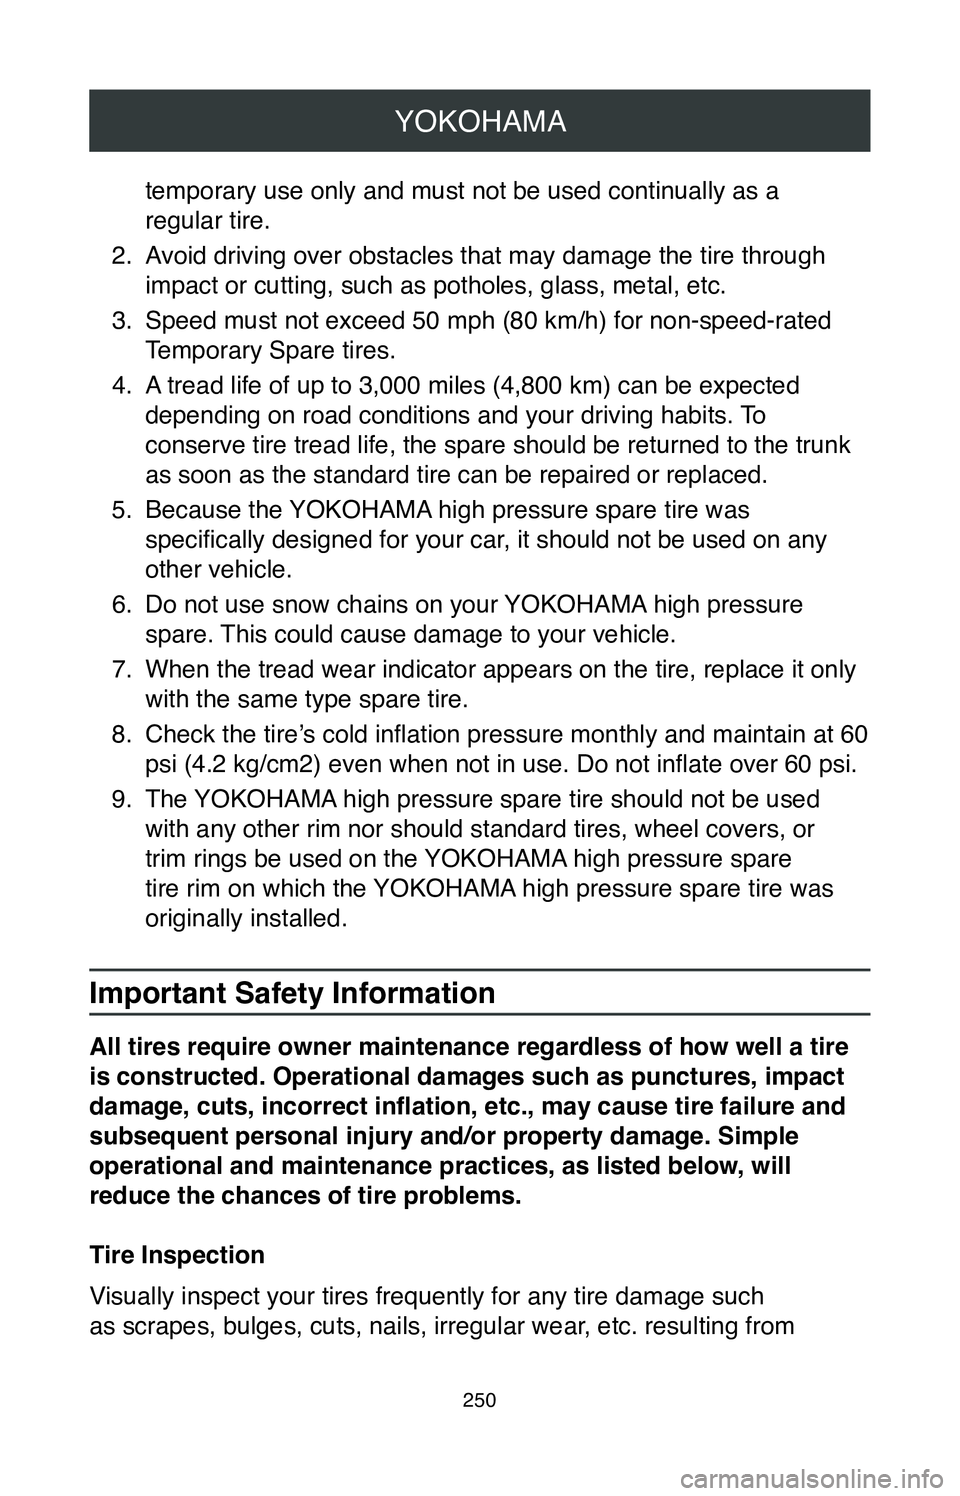 TOYOTA COROLLA HYBRID 2020  Warranties & Maintenance Guides (in English) YOKOHAMA
250
temporary use only and must not be used continually as a  
regular tire.
2.
 Avoid driving over obstacles that may damage the tire through 
impact or cutting, such as potholes, glass, met